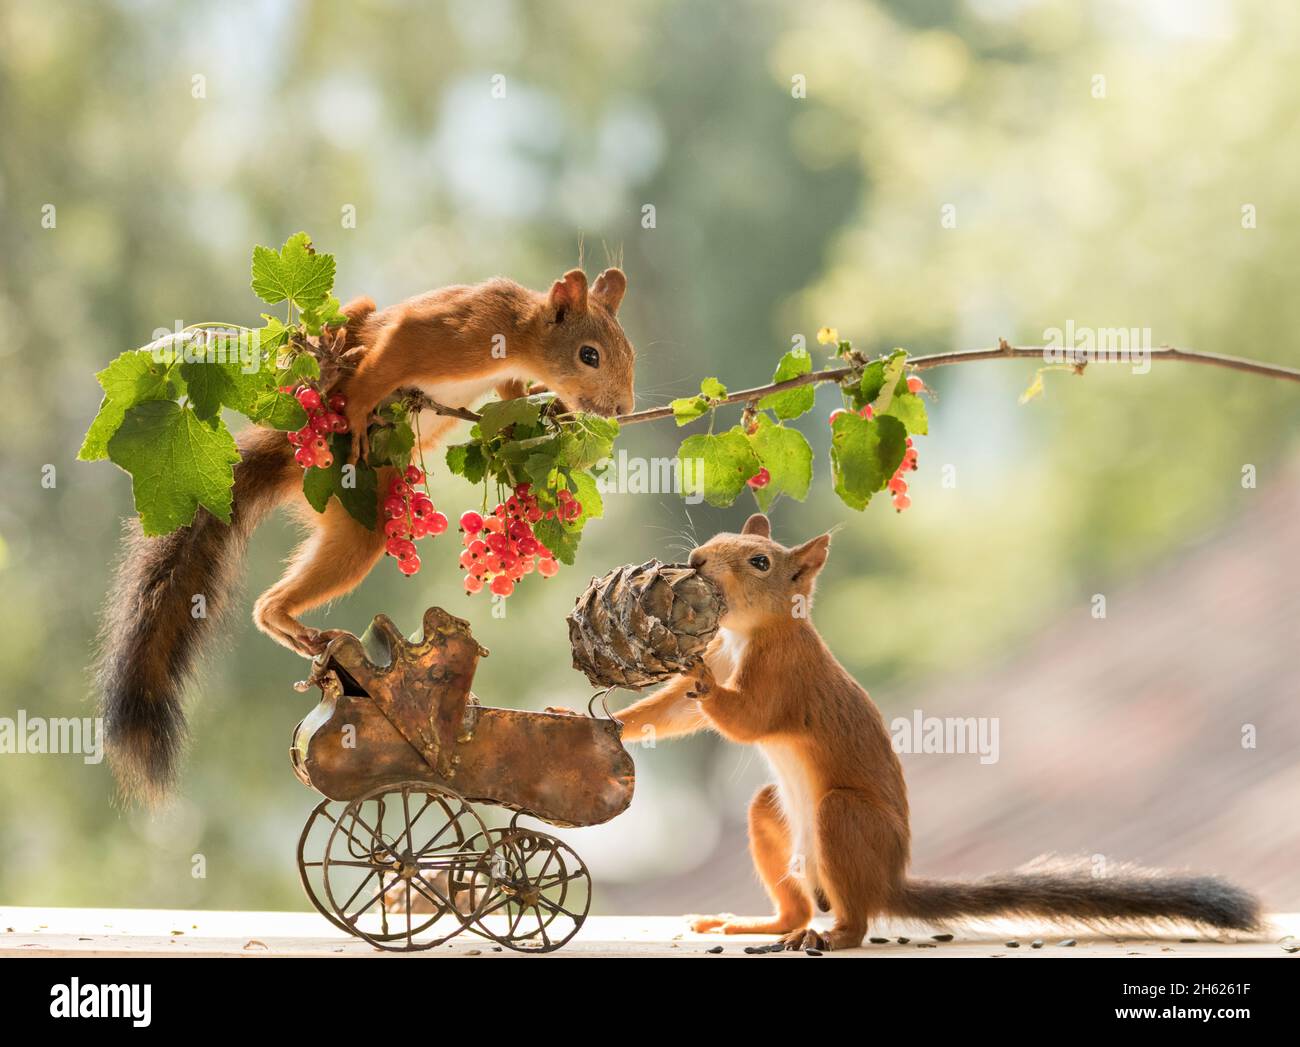 red squirrels standing with an baby stroller Stock Photo